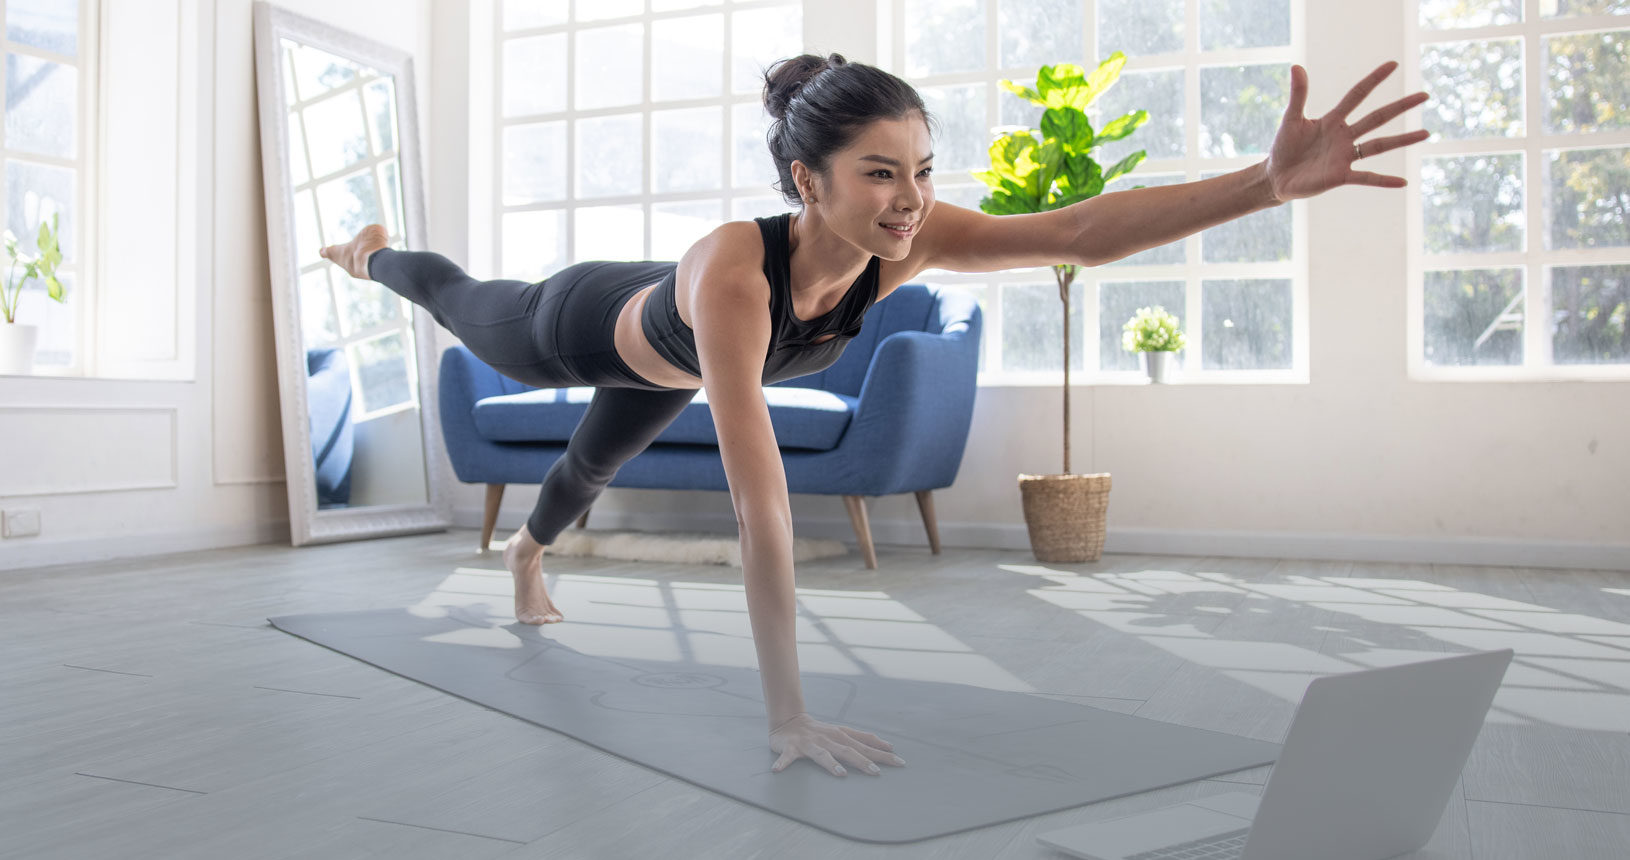 5 Ways New Yorkers Can Do Range-of-motion Exercises At Home